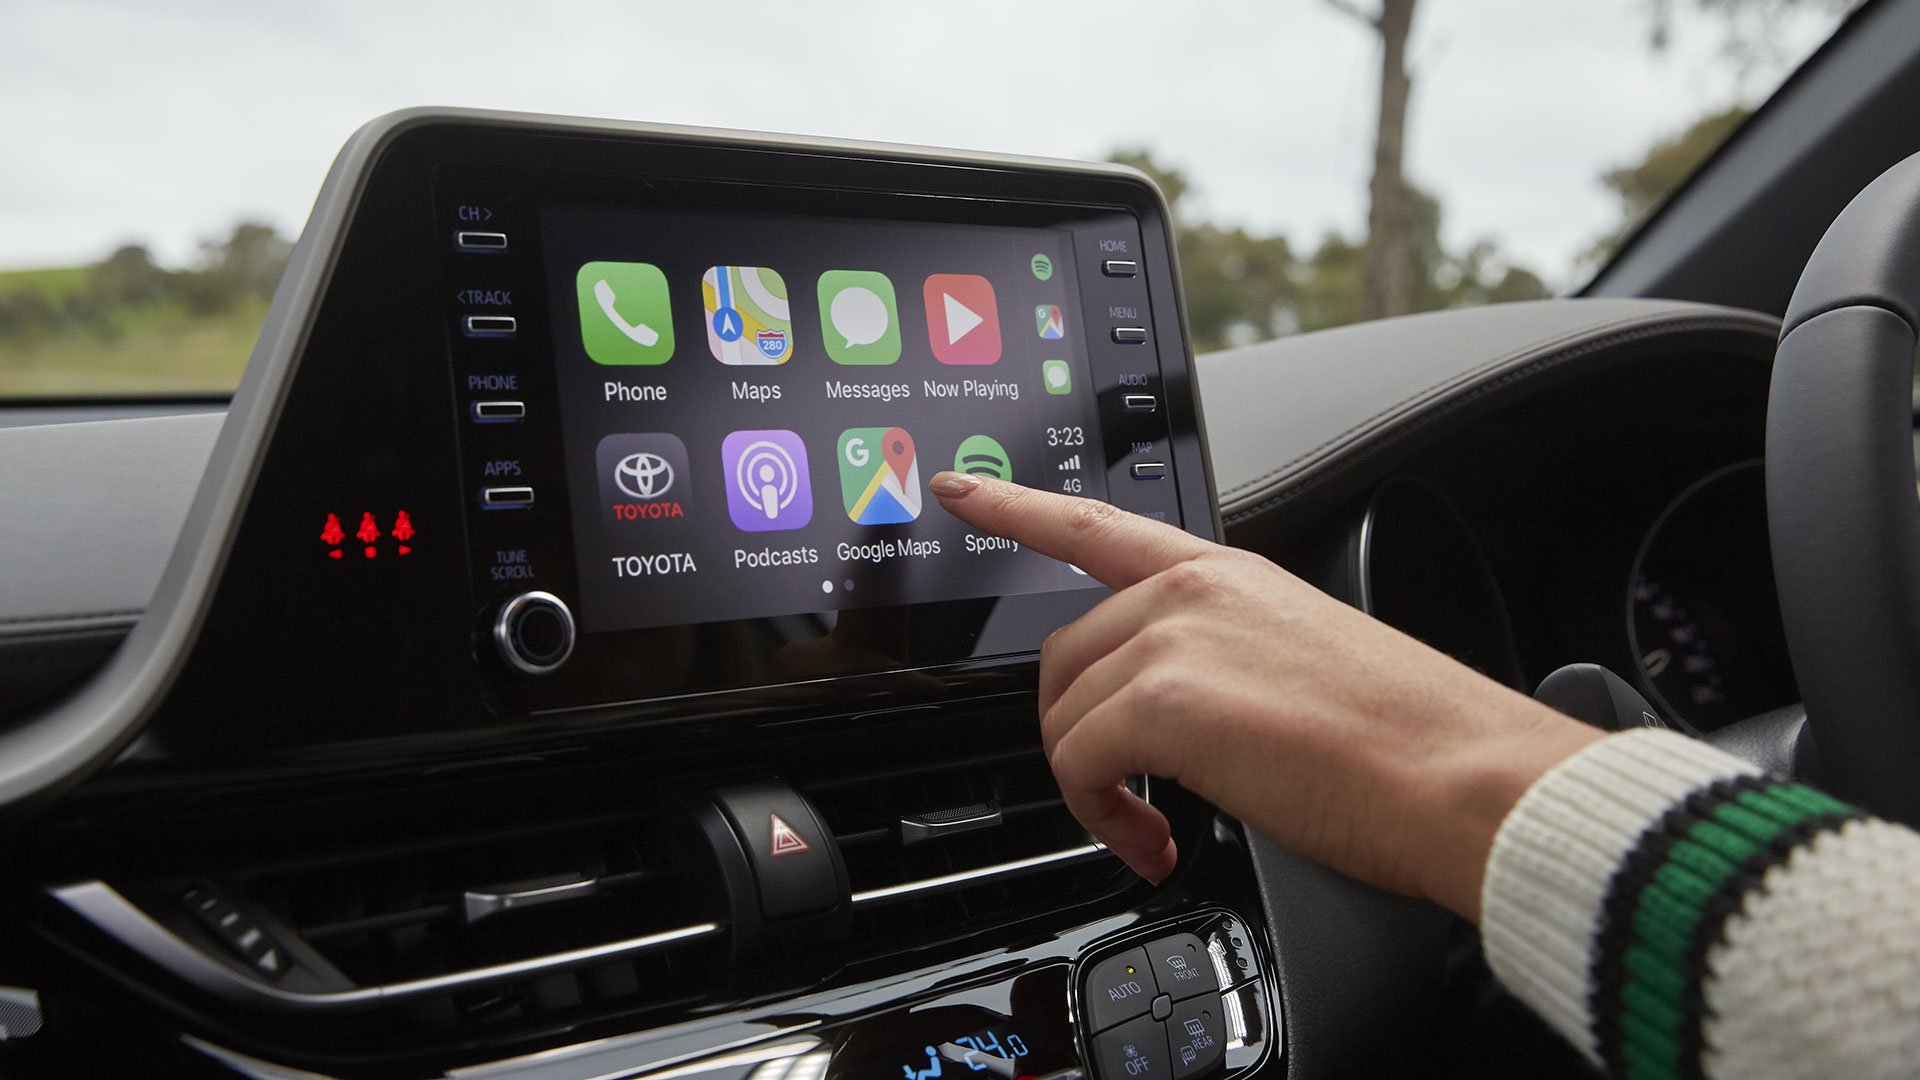 Toyota se une a Ford para competir contra Android Auto y CarPlay #CES2016